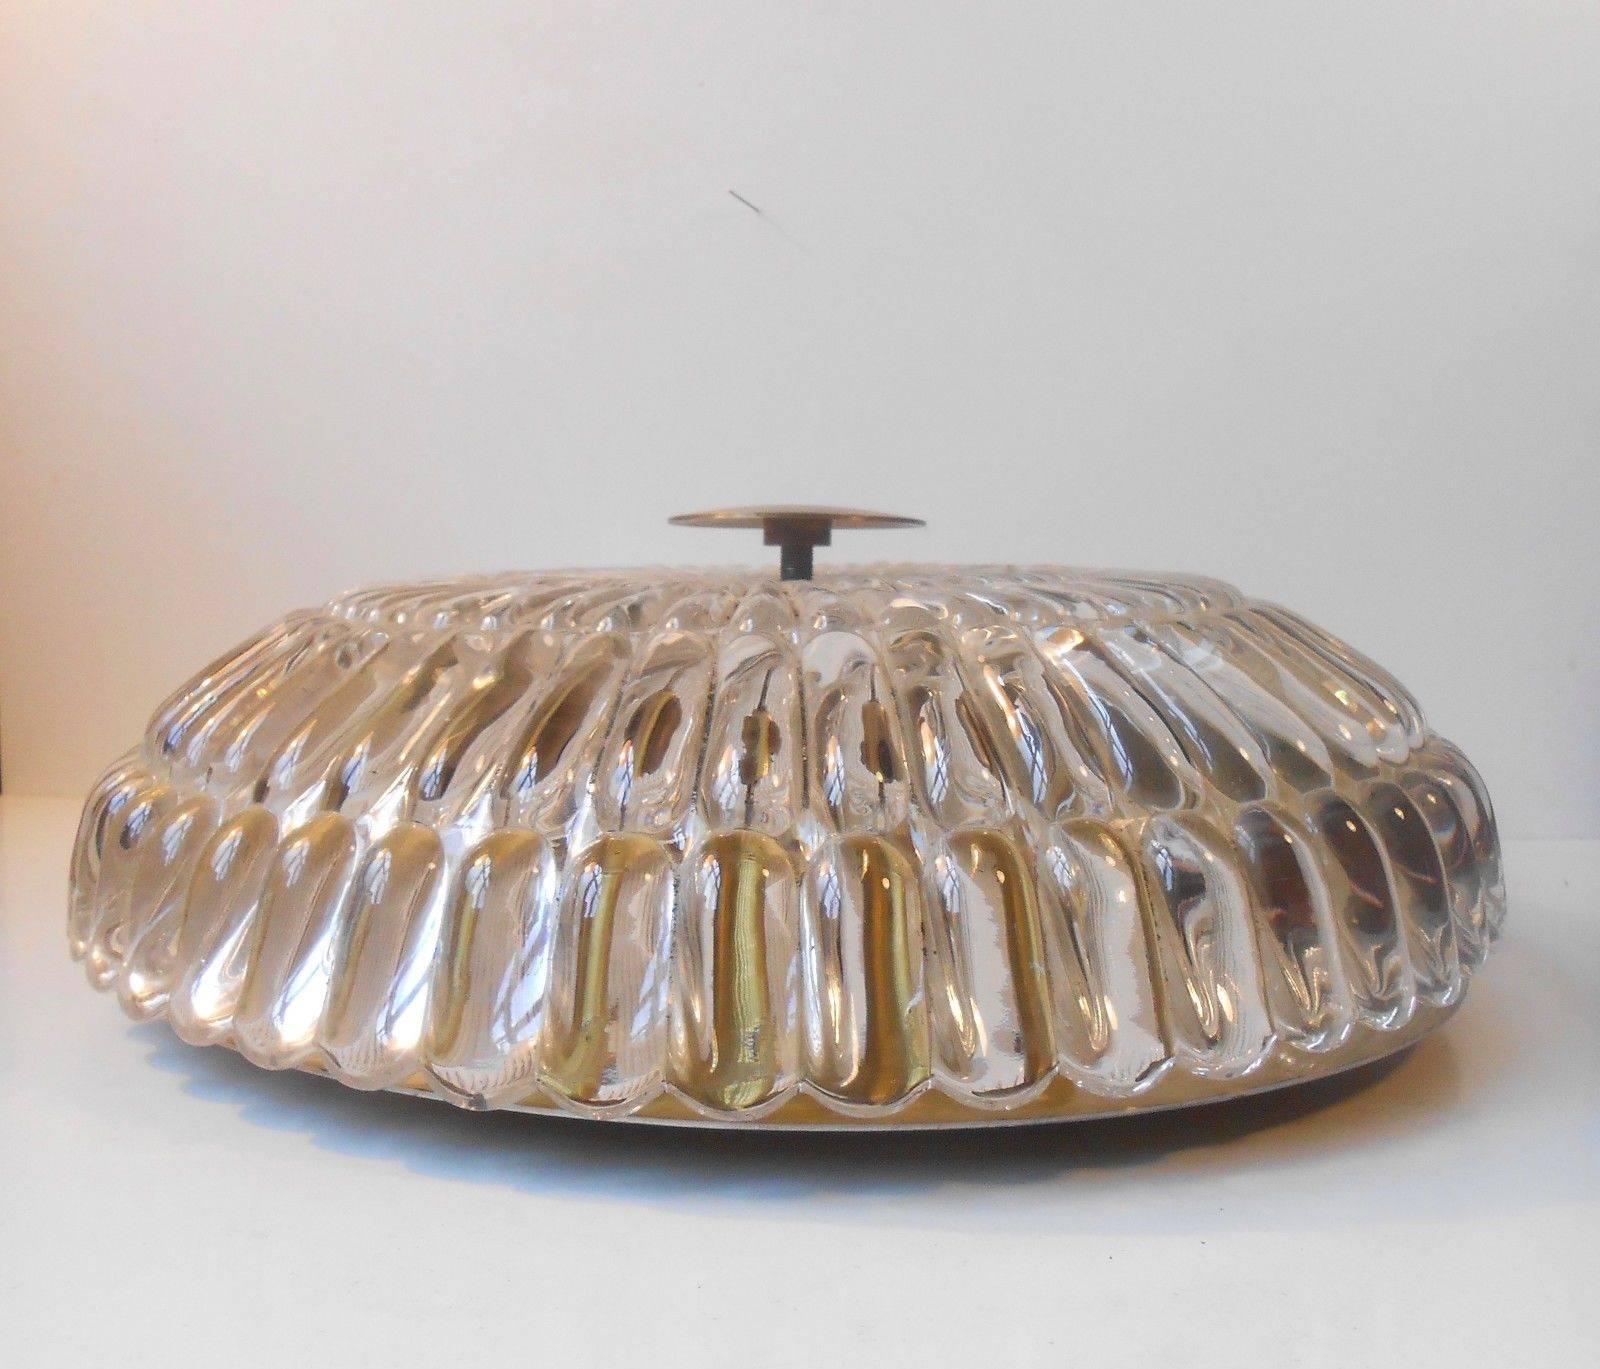 Info and measurements:

Type: Crystal and brass flush mount ceiling chandelier.

Designer: Carl Fagerlund.

Manufacturer: Orrefors.

Origin: Sweden.

Period: Early part of the 1950s.

Diameter: Approximately 40 cm (16 inches).

Depth: